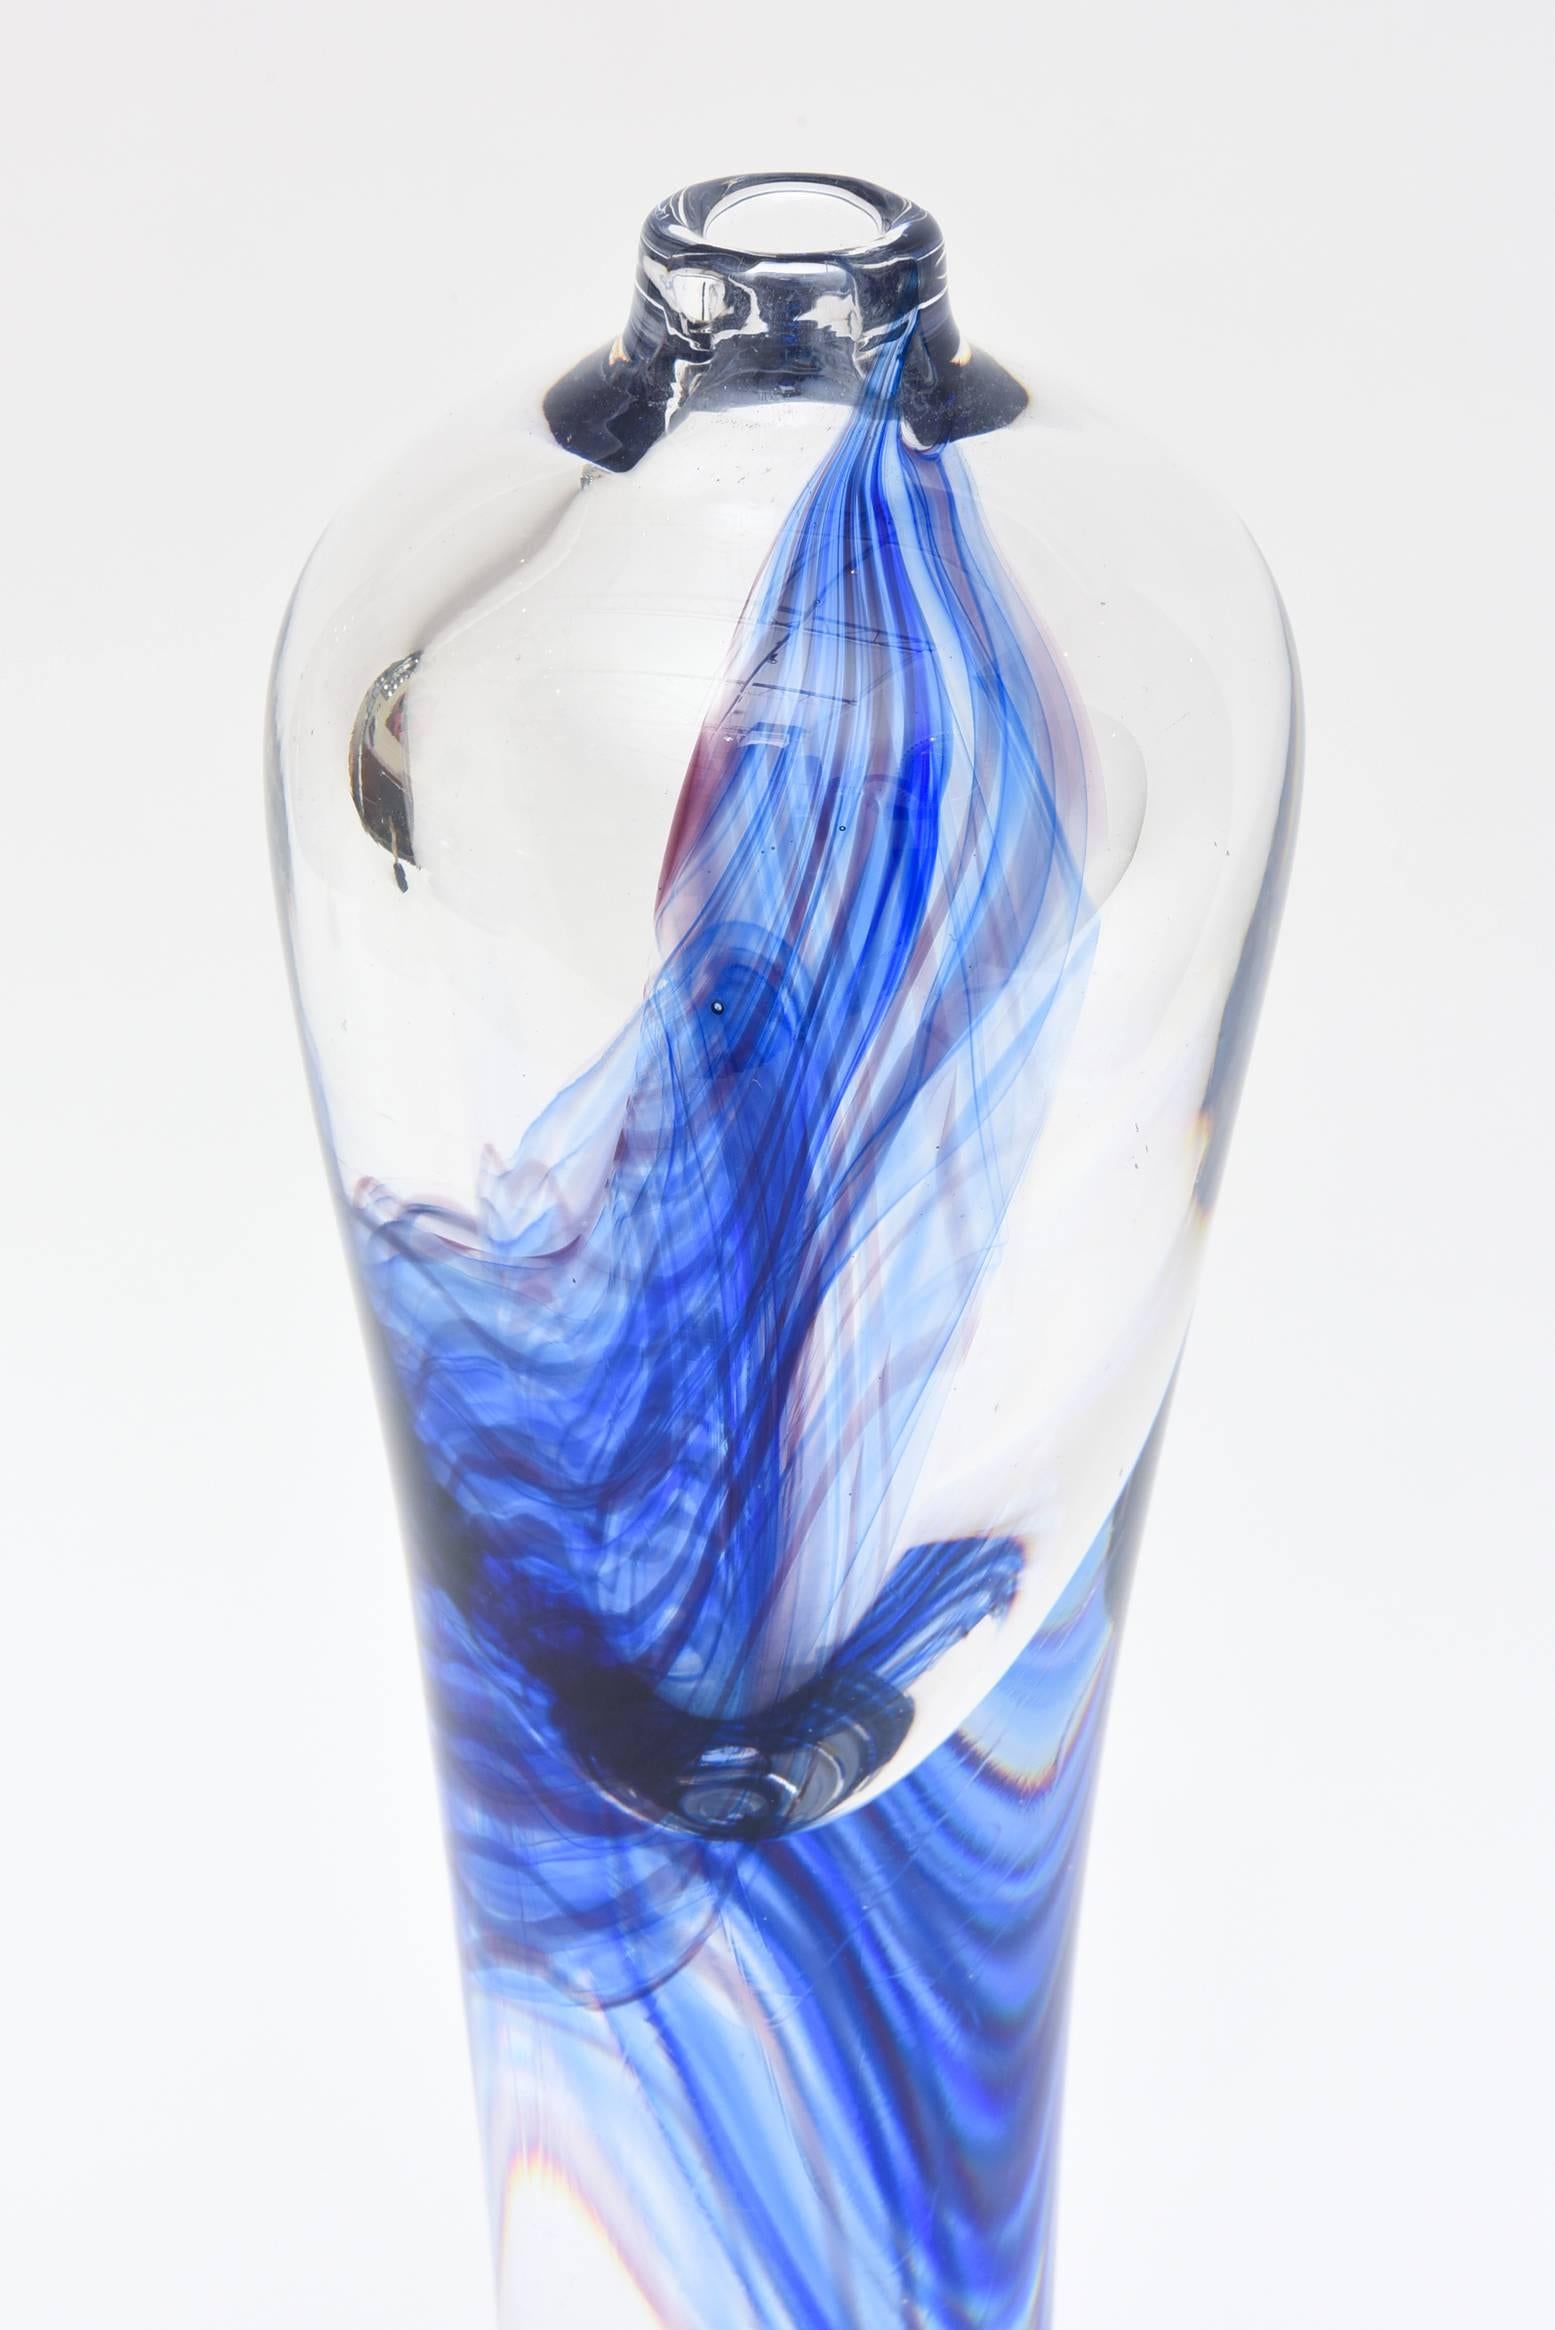 This substantial and very heavy signed and numbered Kosta Boda sculpture has the brilliant hues of Yves Klein blues and some swirls of purple.
It has a sticker of Kosta crystal and signed on the bottom as Kosta G. Warhunik 81-481. It is only 7